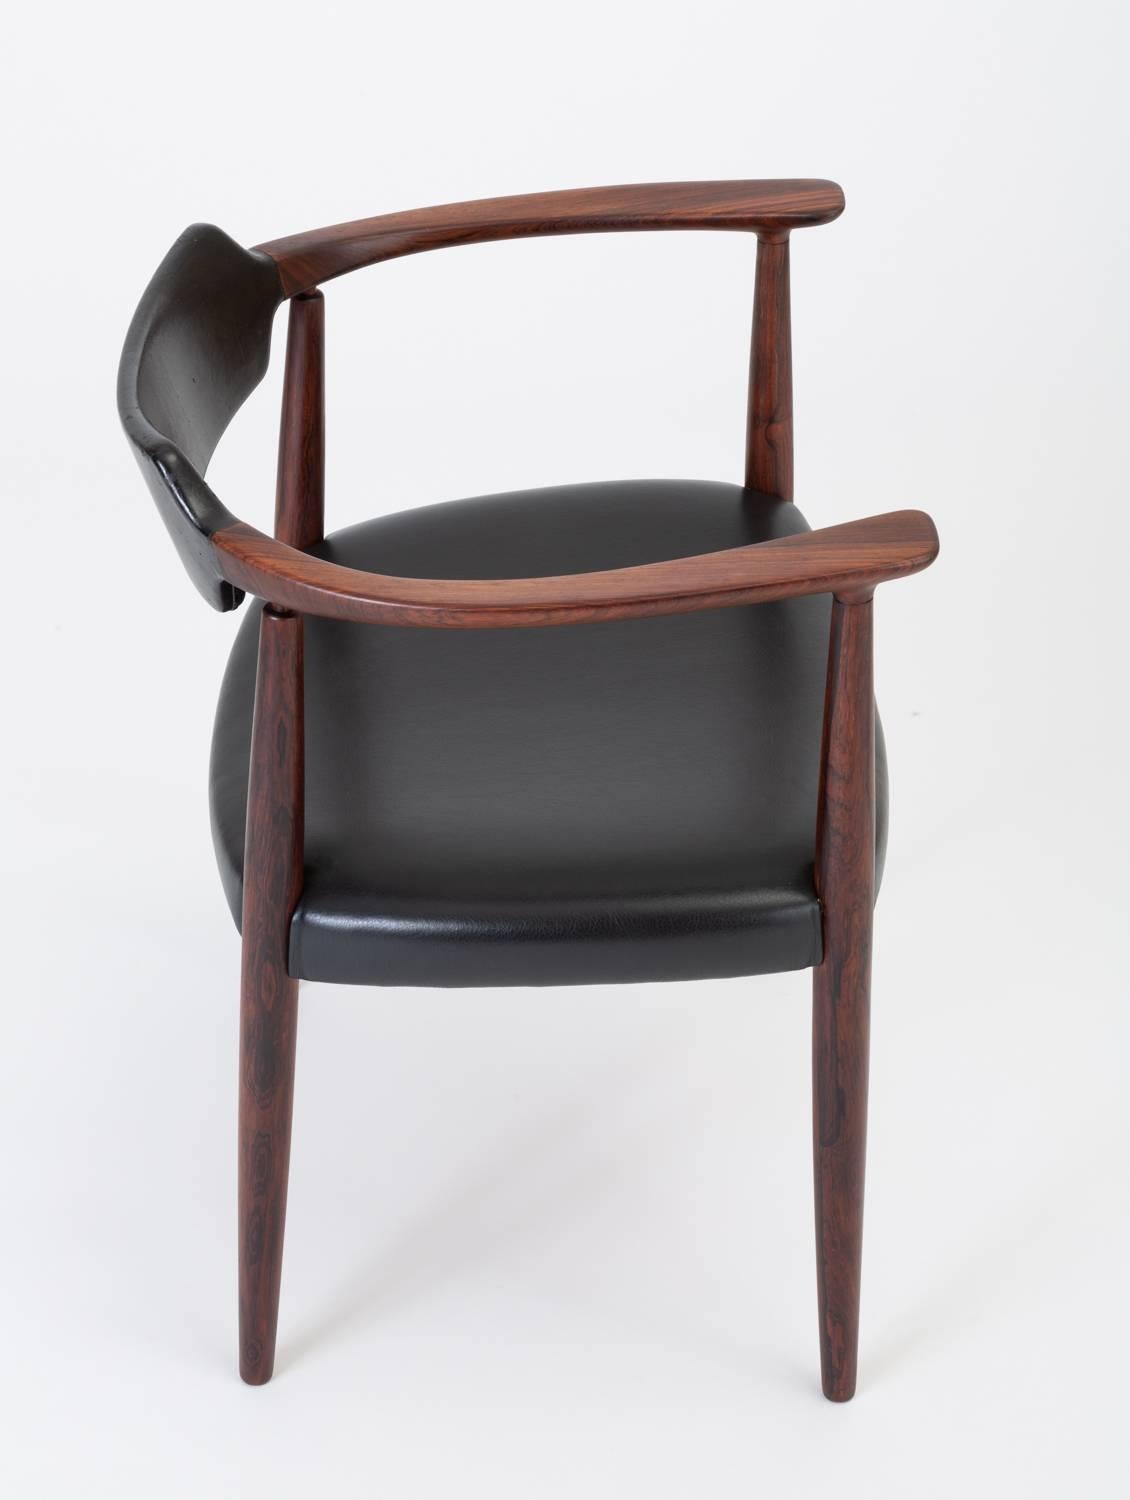 Mid-20th Century Rosewood and Leather Armchair by Bent Andersen for Christensen & Larsen